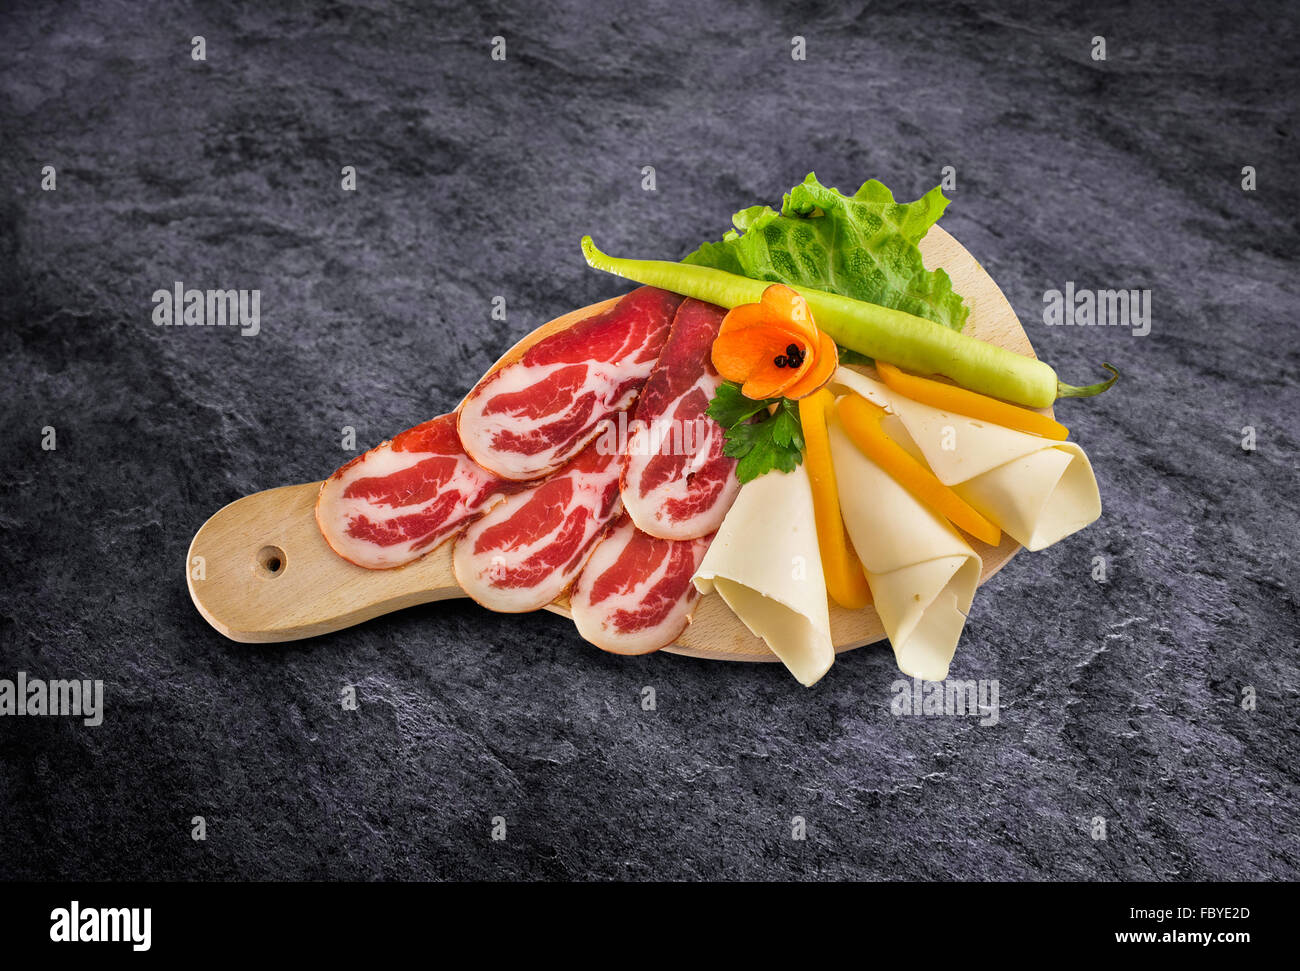 Prosciutto - parma smoked ham with vegetables on wooden board and clipping path Stock Photo